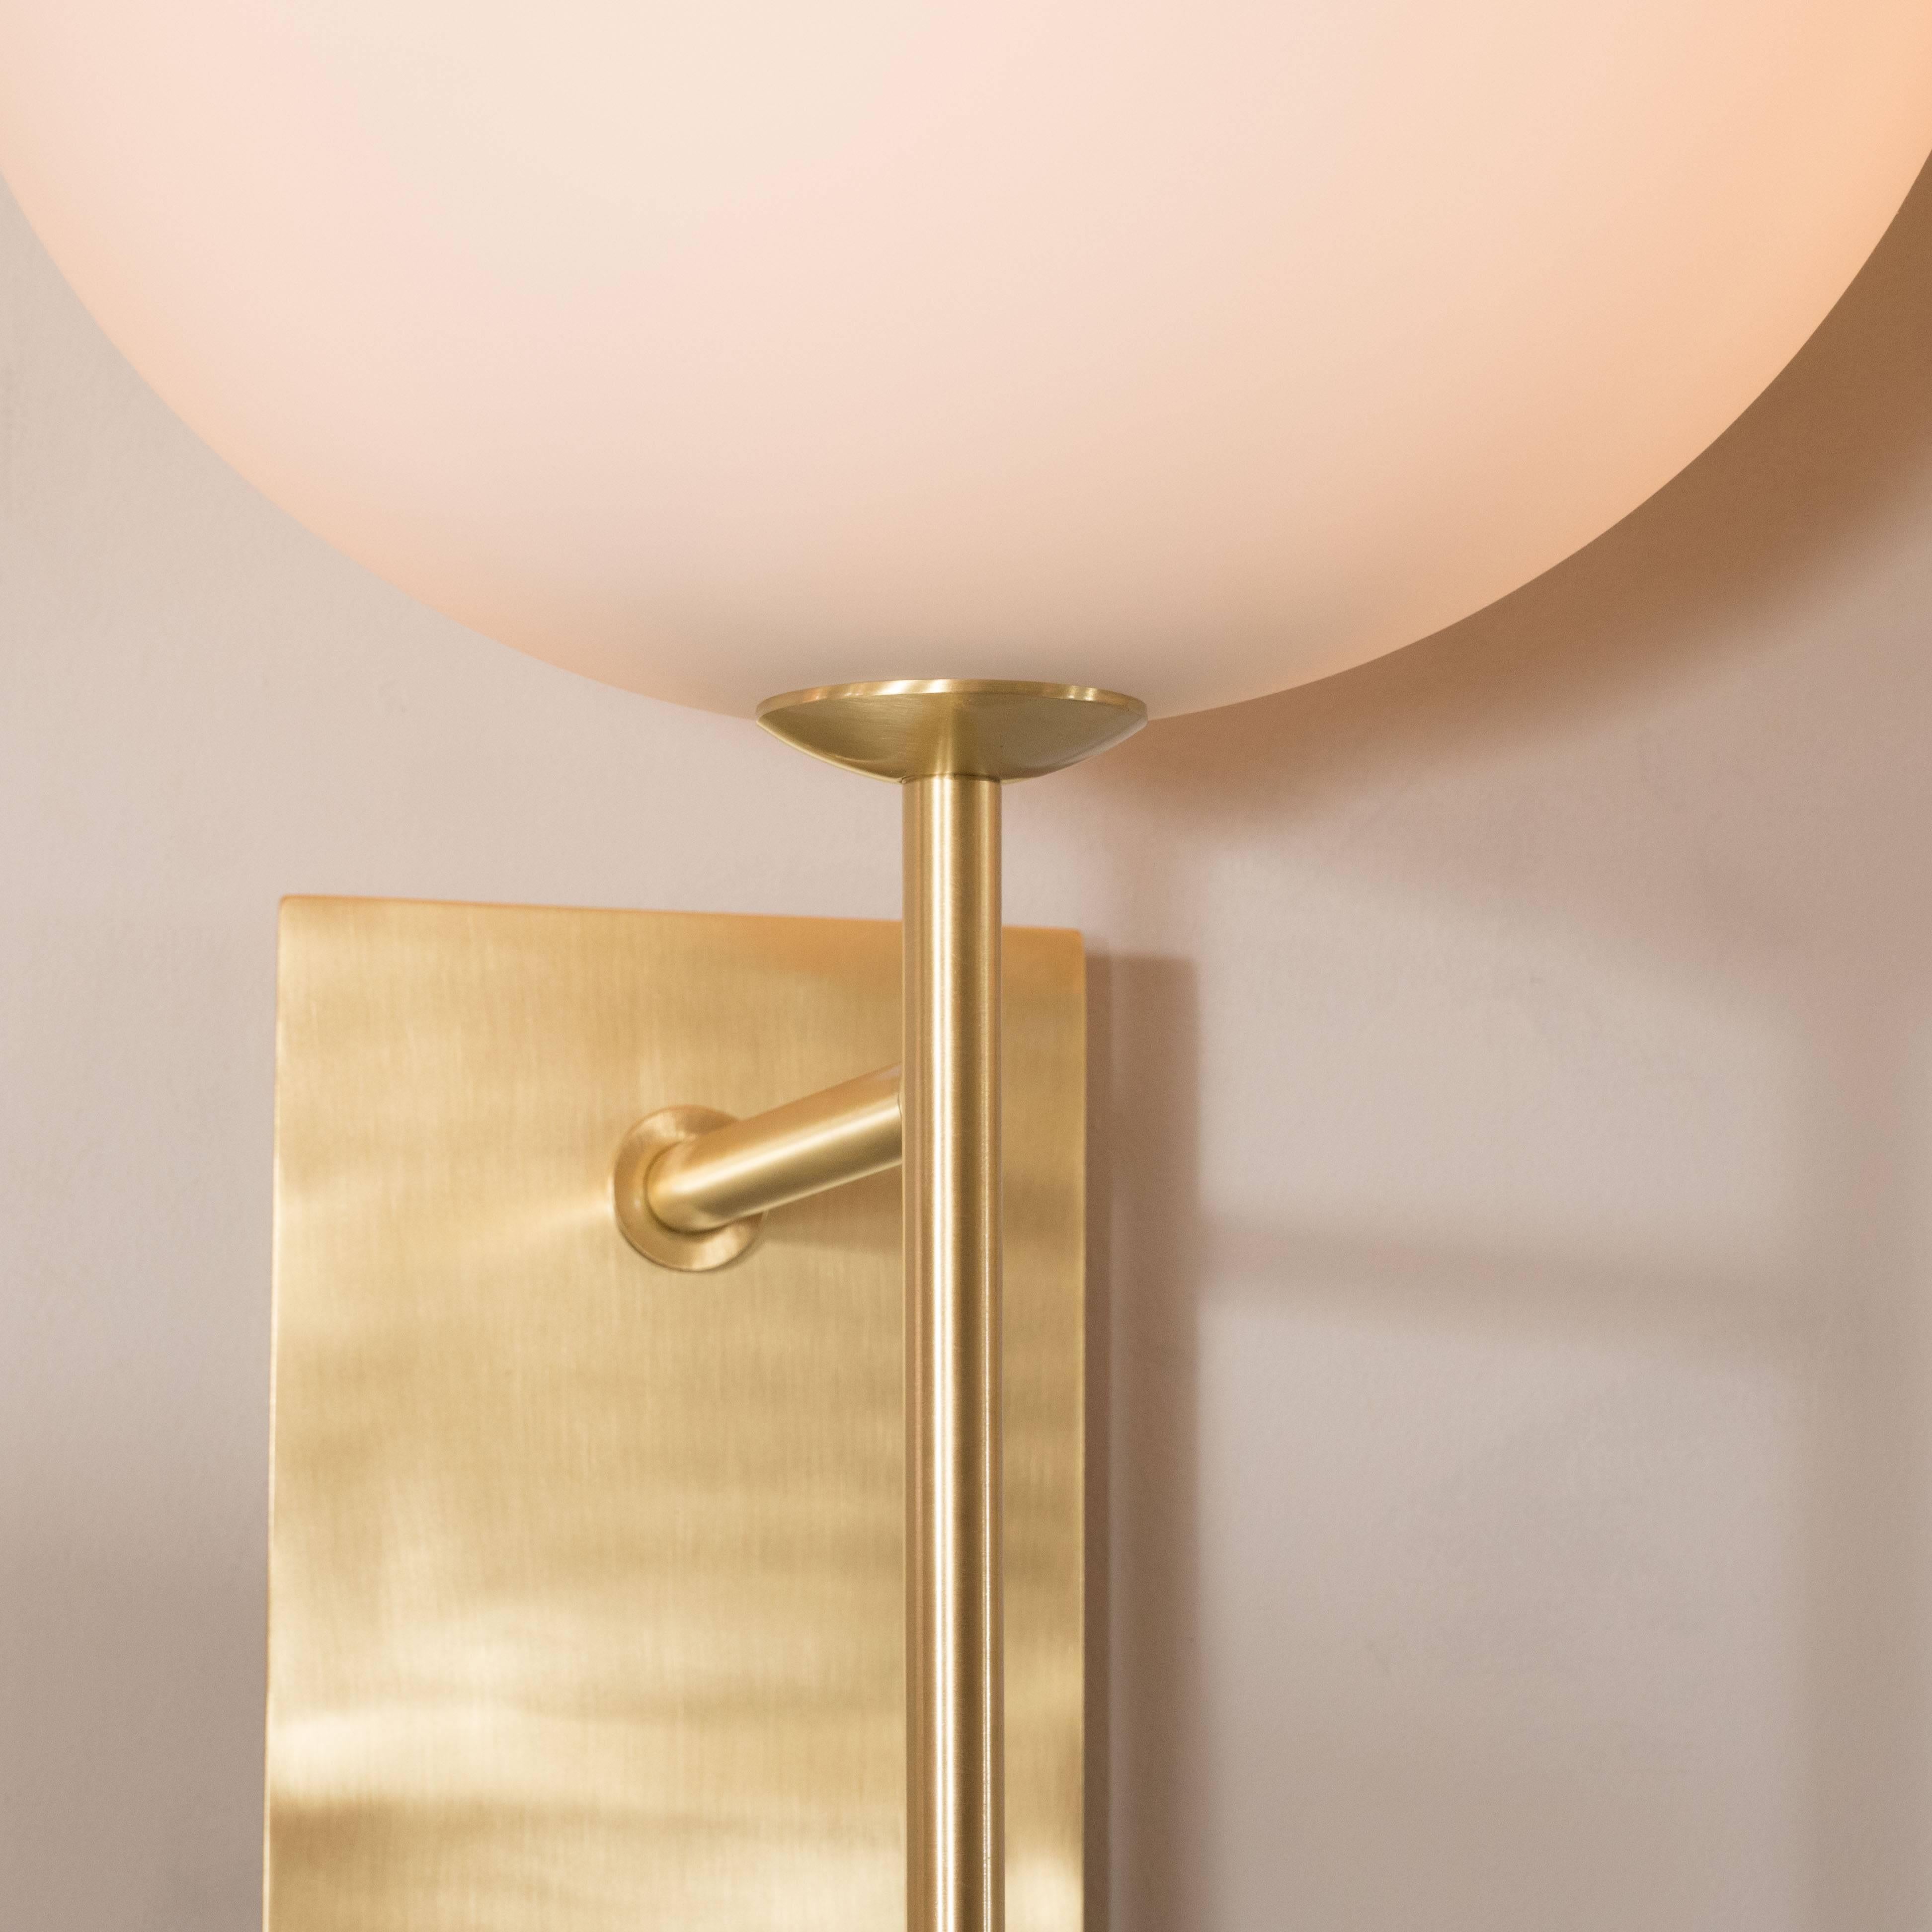 Contemporary Pair of Reverse-Dome Trophy Sconces in Murano Milk Glass and Brass